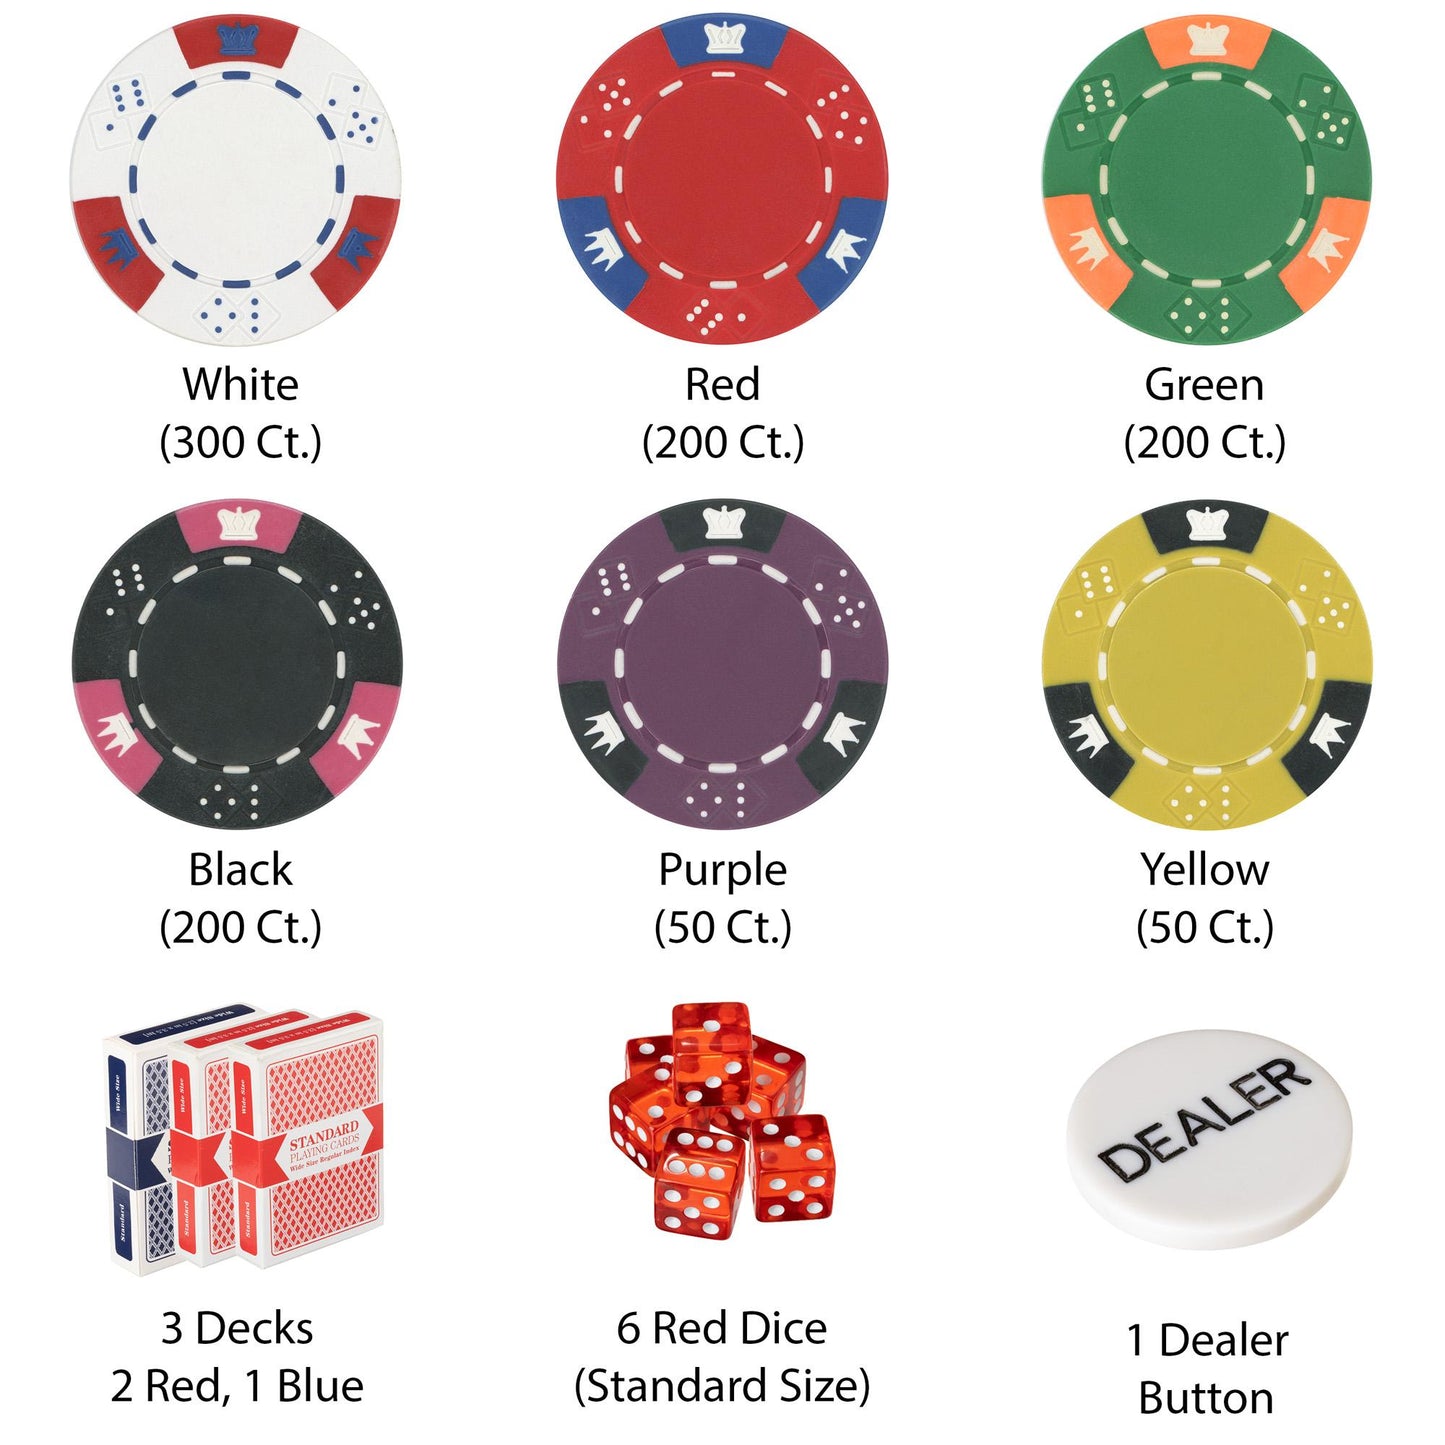 1000 Crown and Dice Poker Chips with Aluminum Case